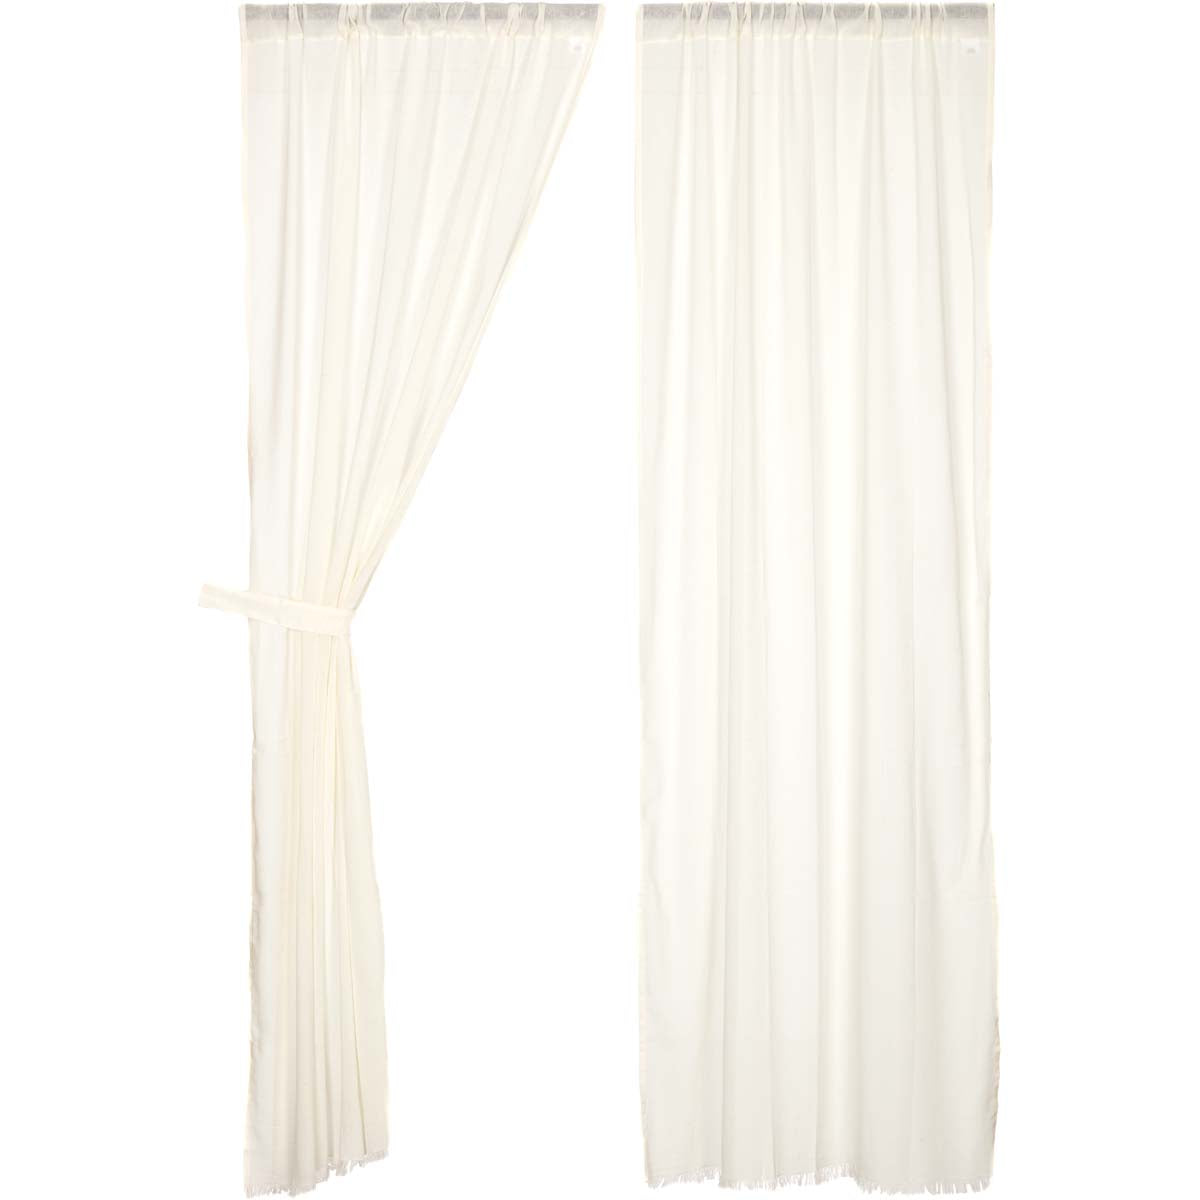 April & Olive Tobacco Cloth Antique White Panel Fringed Set of 2 84x40 By VHC Brands